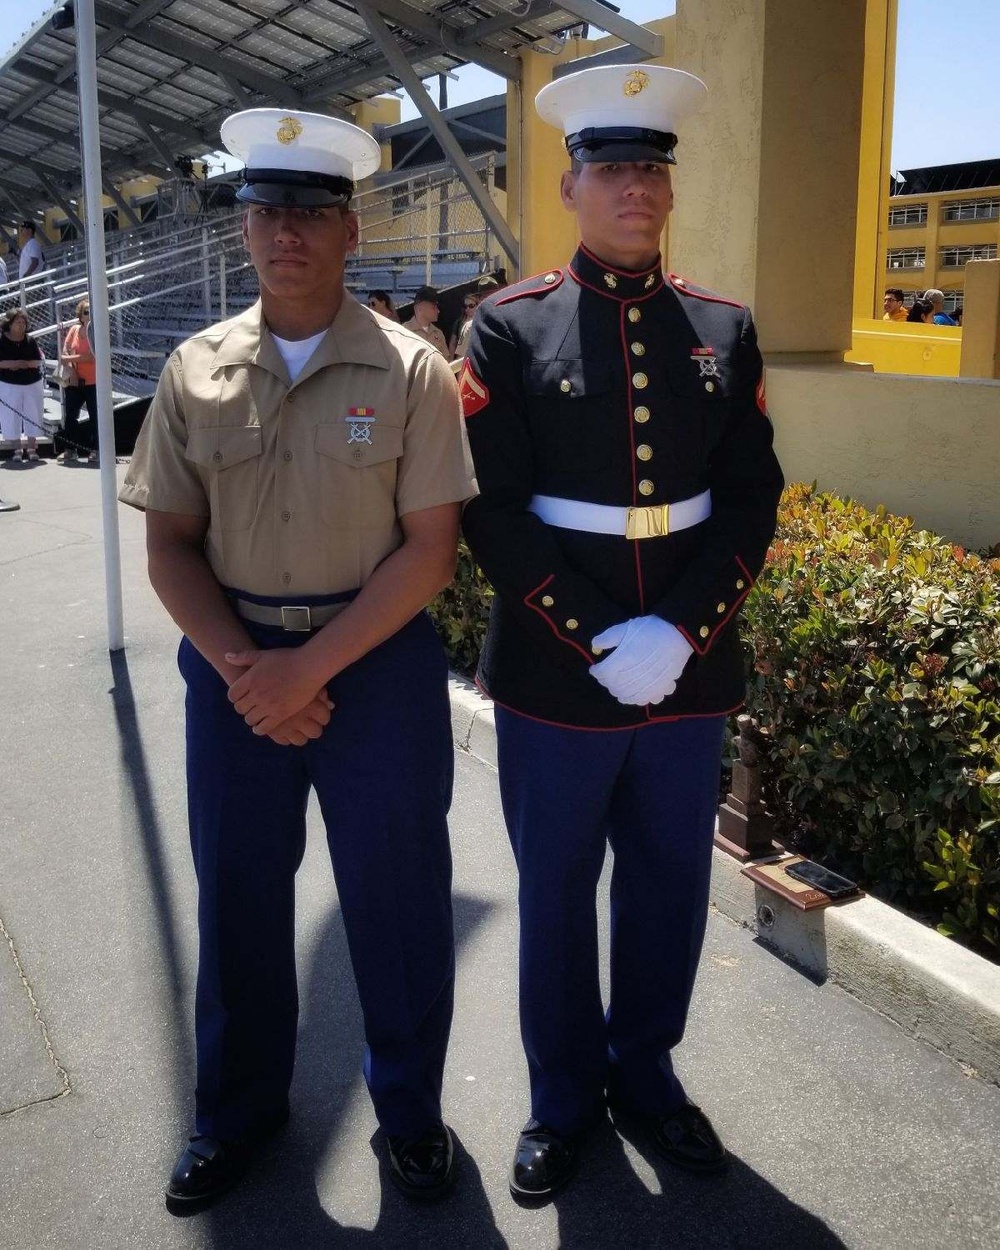 Local MMA fighters and twins graduate Marine Corps Recruit Training with honors